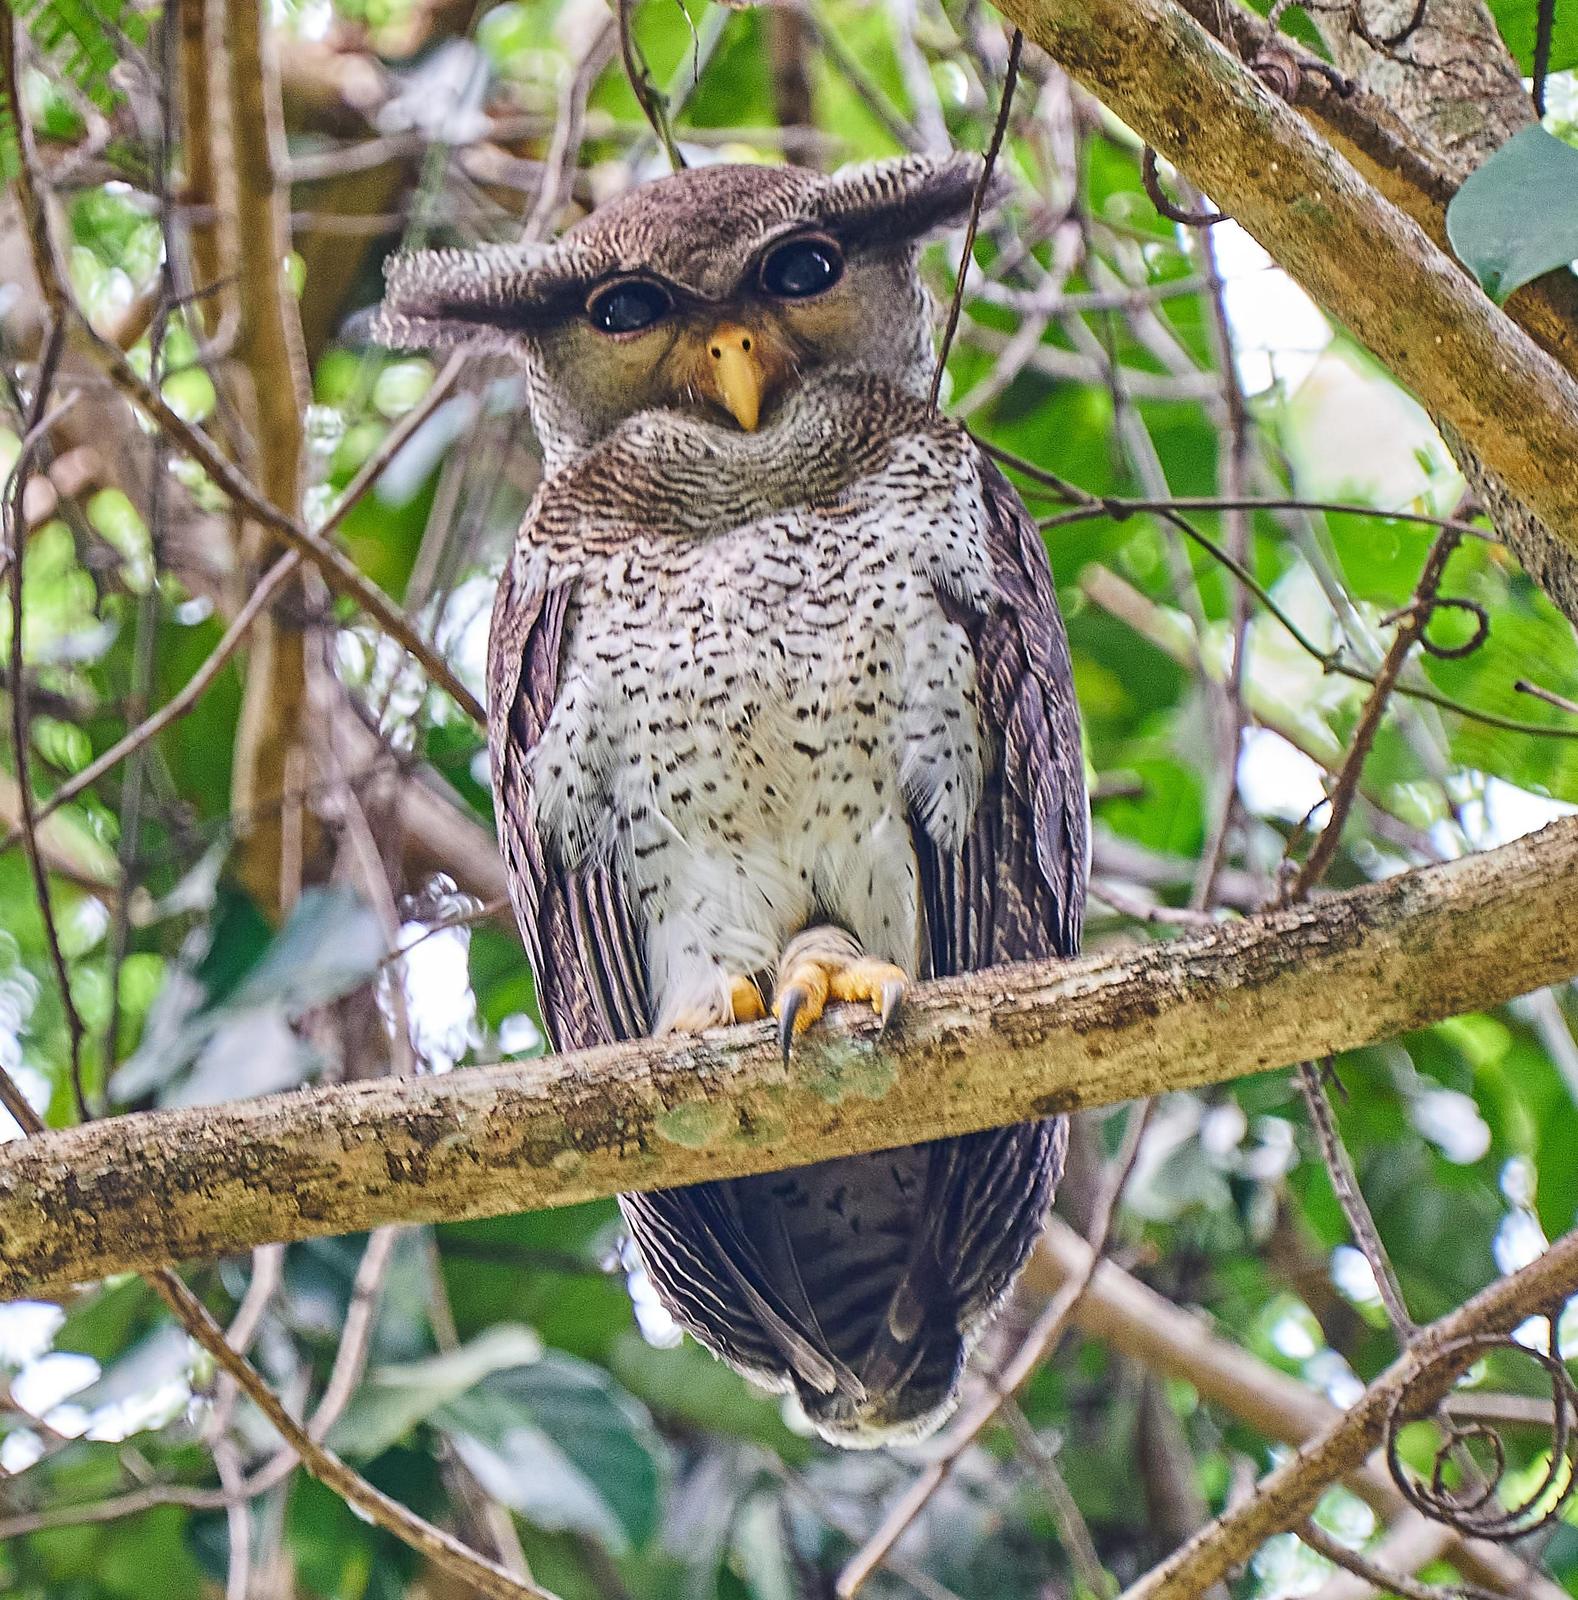 Barred Eagle-Owl Photo by Steven Cheong